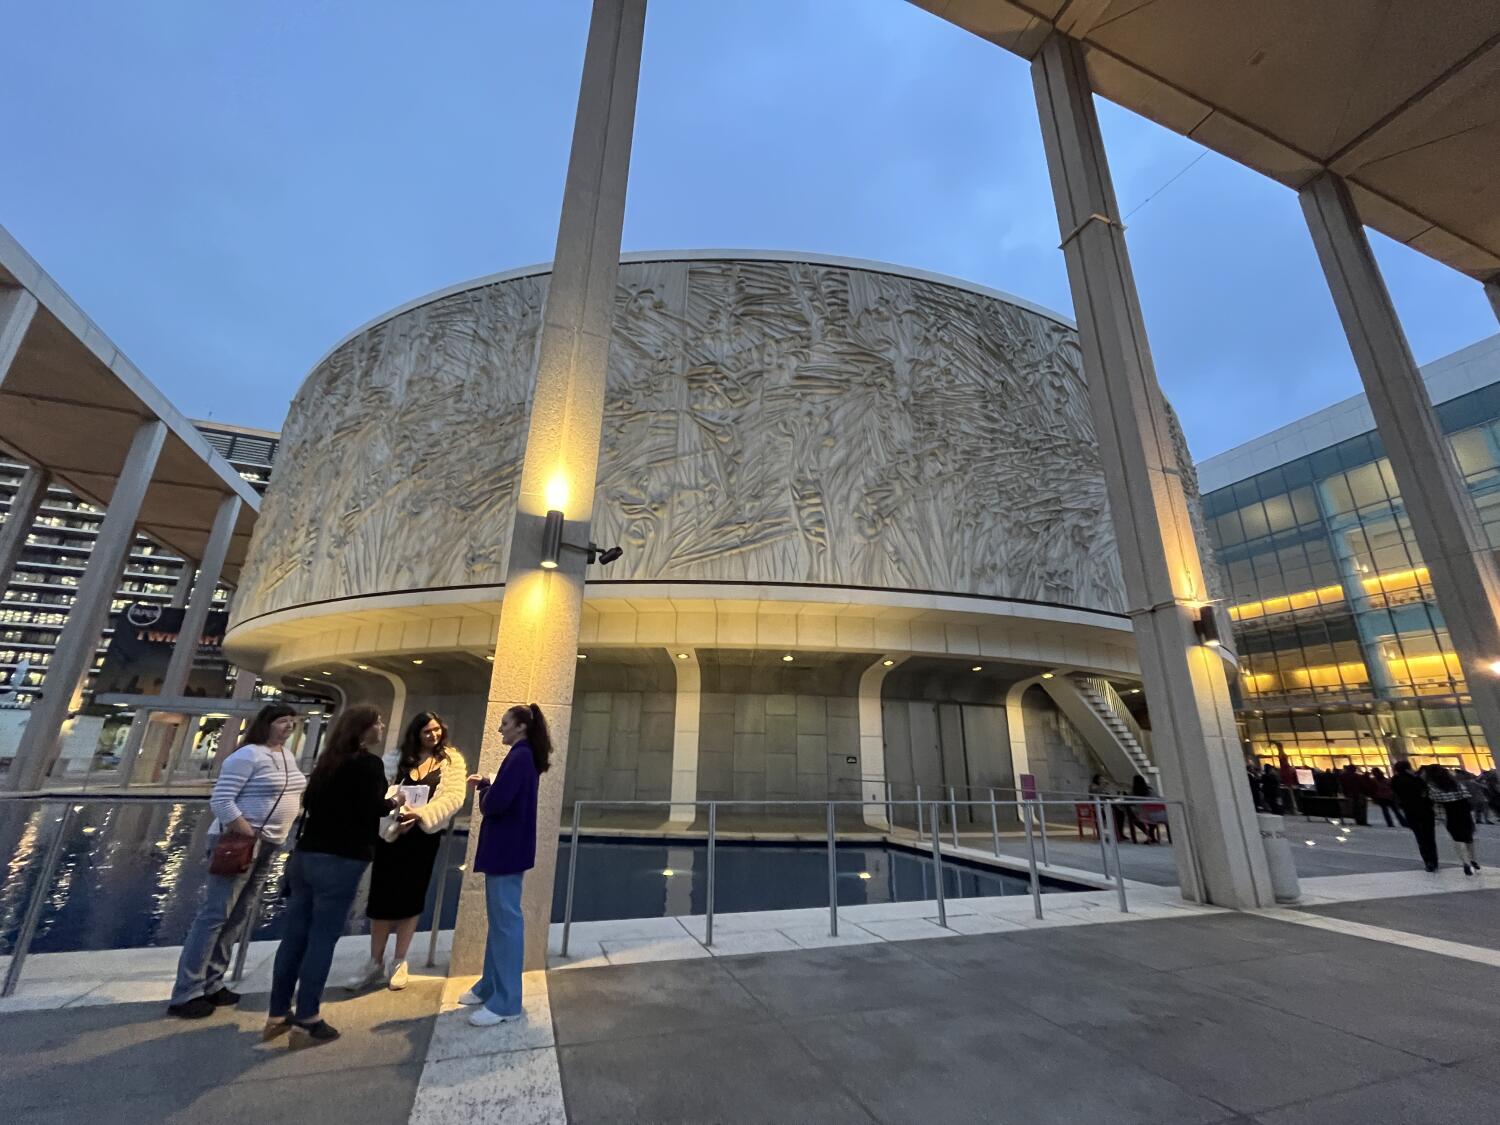 L.A.'s Mark Taper Forum will reopen, but does Center Theatre Group have a sustainable path forward?